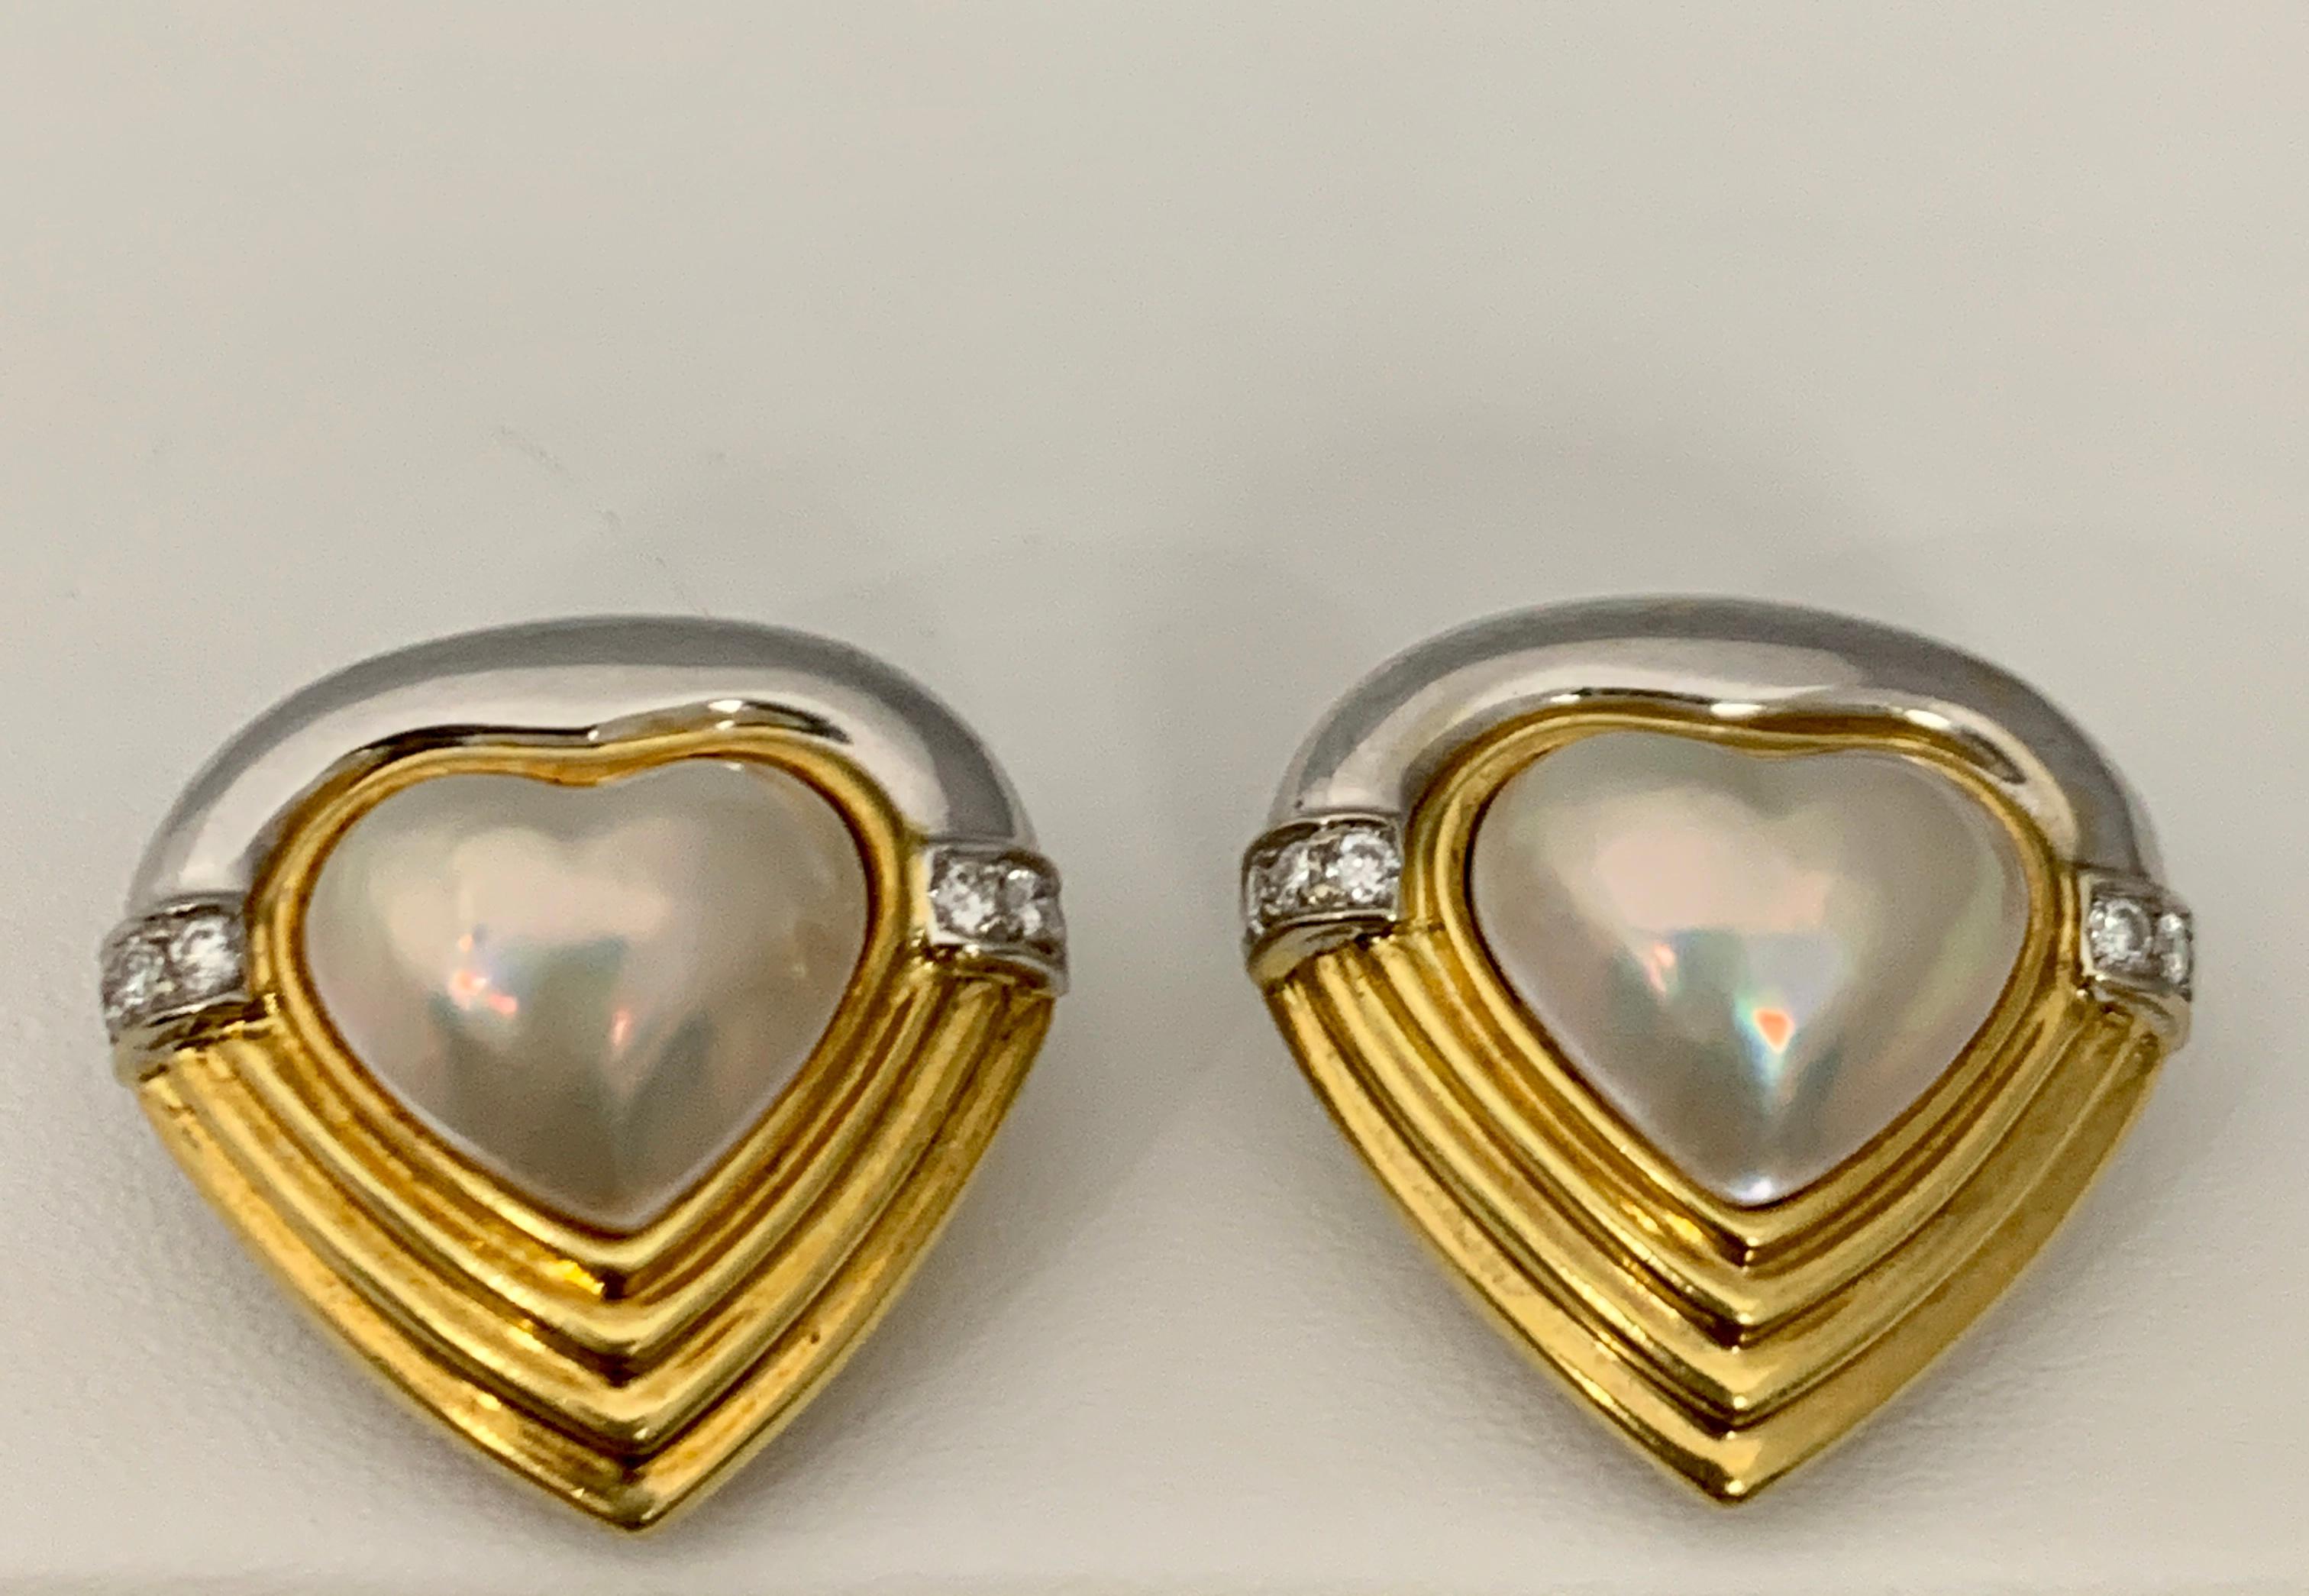 A beautiful pair of Heart Shape Mabe Pearl earrings with Diamonds set in Two tone white and yellow   18K gold
size of the heart Mother of Pearl 13X15 mm
All pearls are absolutely clean 
perfect pair made in 18 Karat White and Yellow gold
18 K Gold